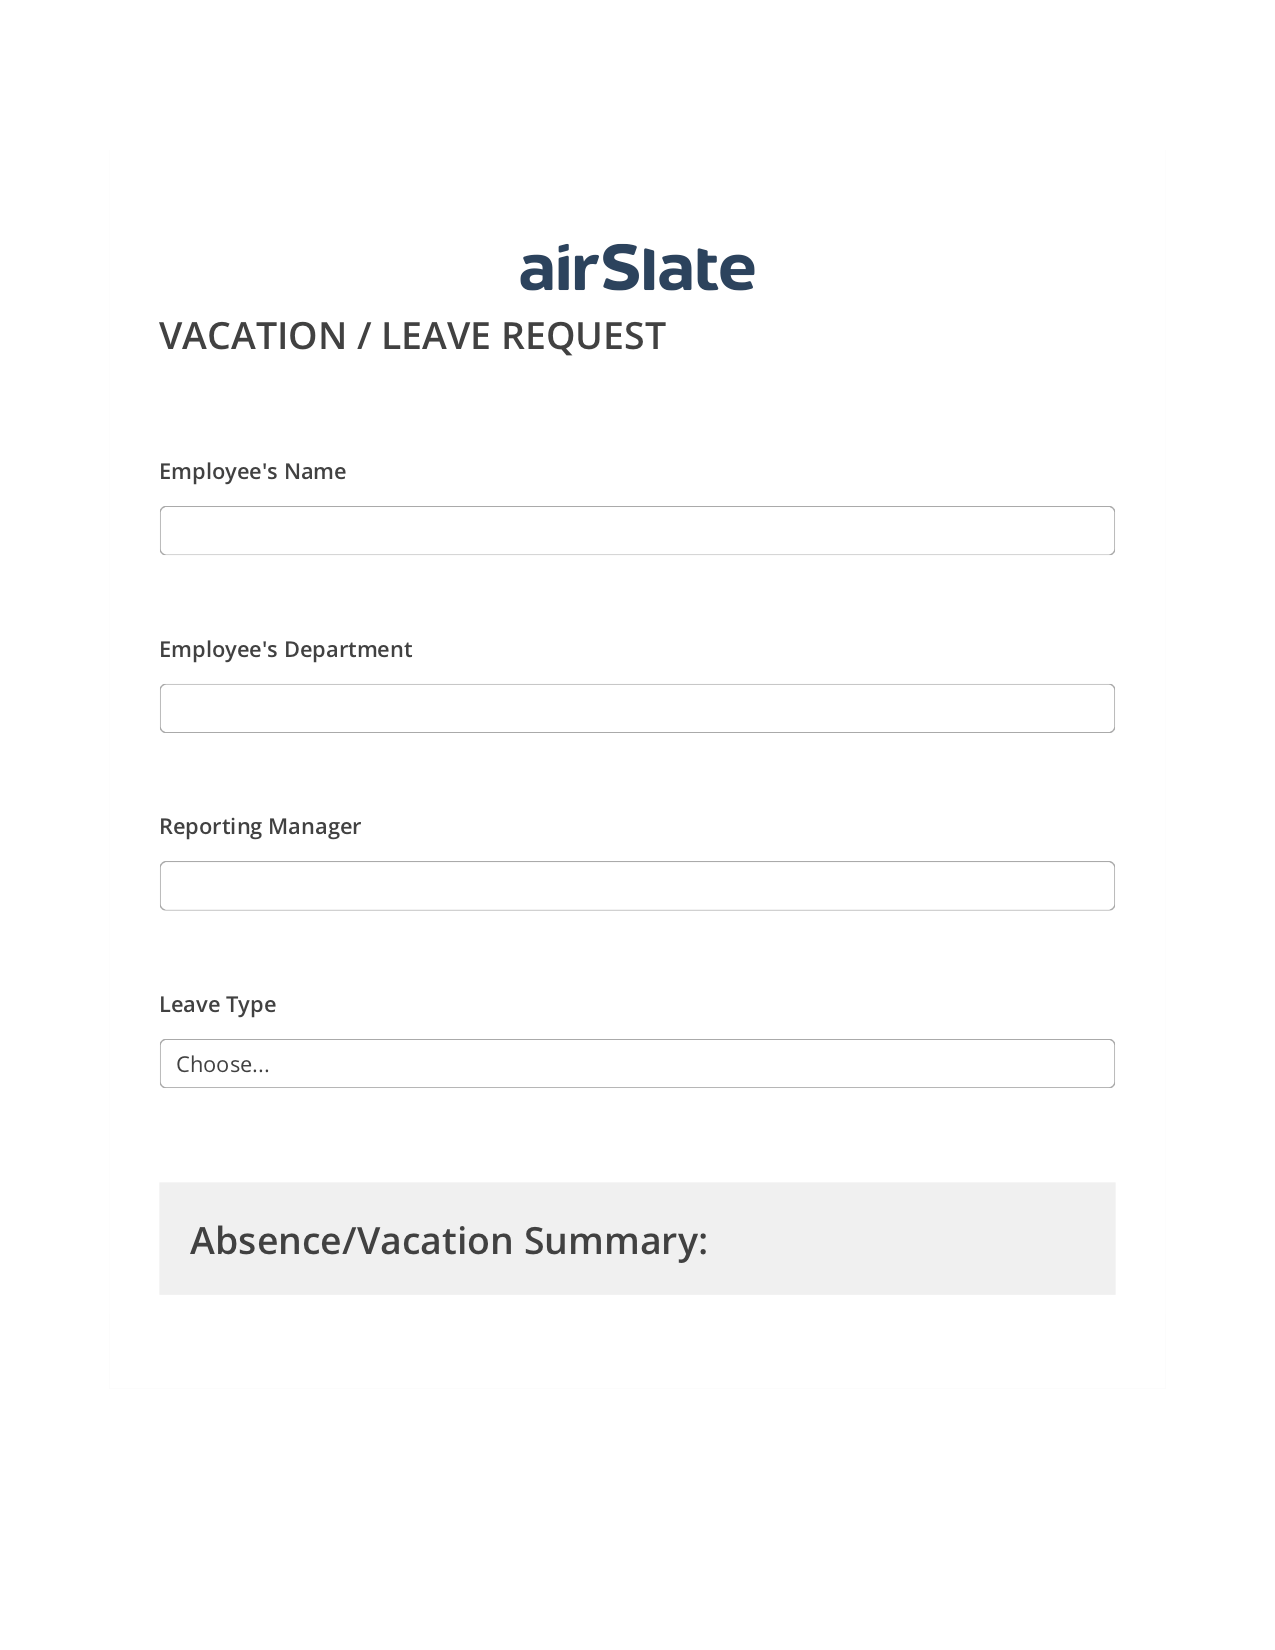 Vacation/Leave Request Workflow Pre-fill from Salesforce Records Bot, Update Salesforce Records Bot, Export to NetSuite Bot